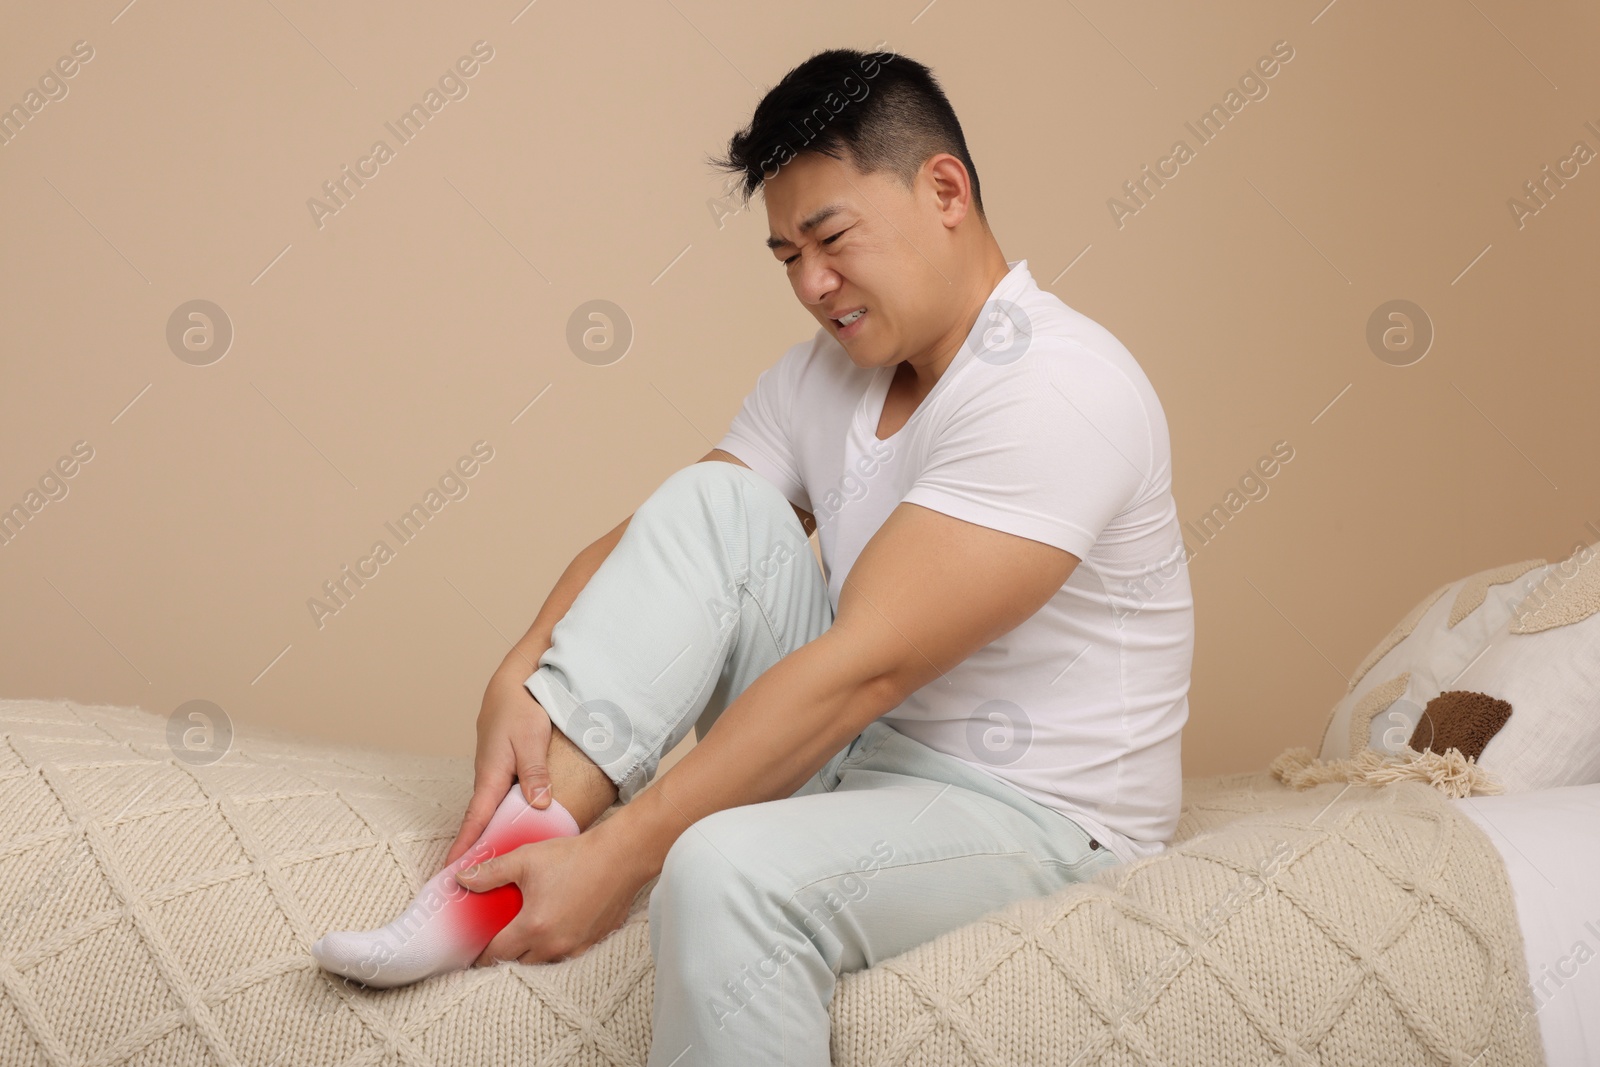 Image of Man suffering from pain in ankle on bed